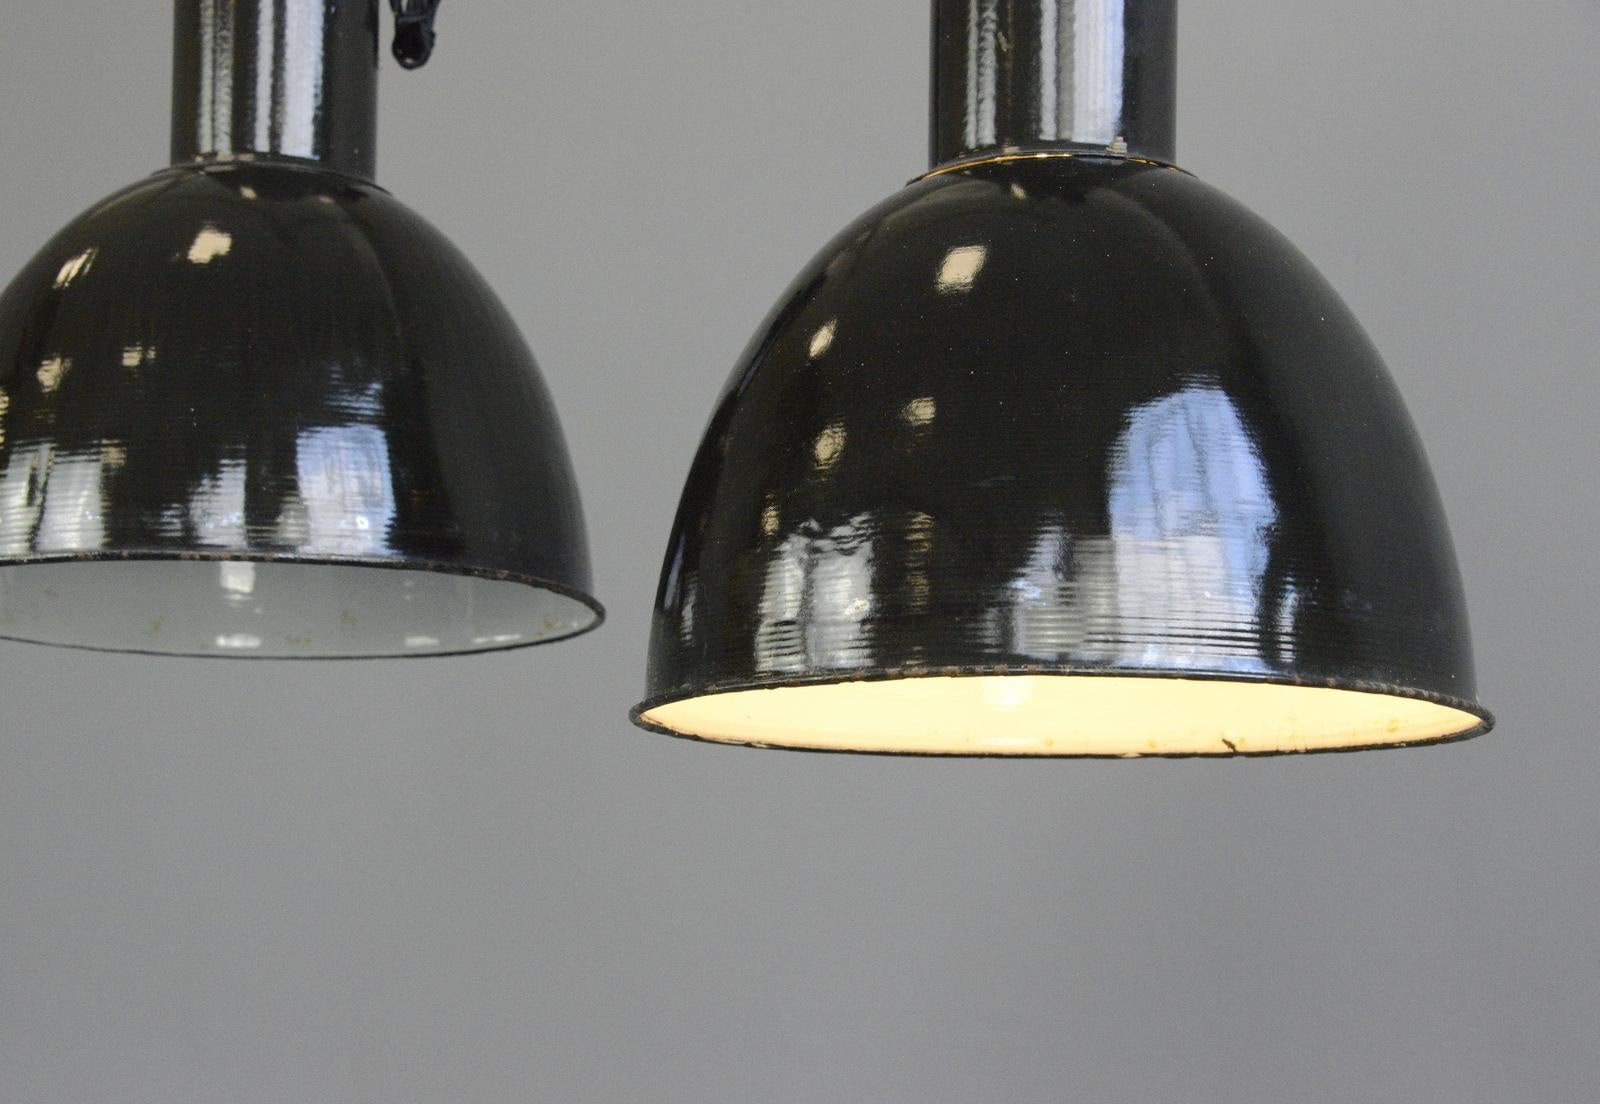 Black enamel Bauhaus Factory lights, circa 1930s

- Price is per light
- Vitreous black enamel shades
- White enamel inner reflectors
- Cast iron tops
- Comes with 100cm of black braided cable
- Comes with chain and ceiling hook
- Takes E27